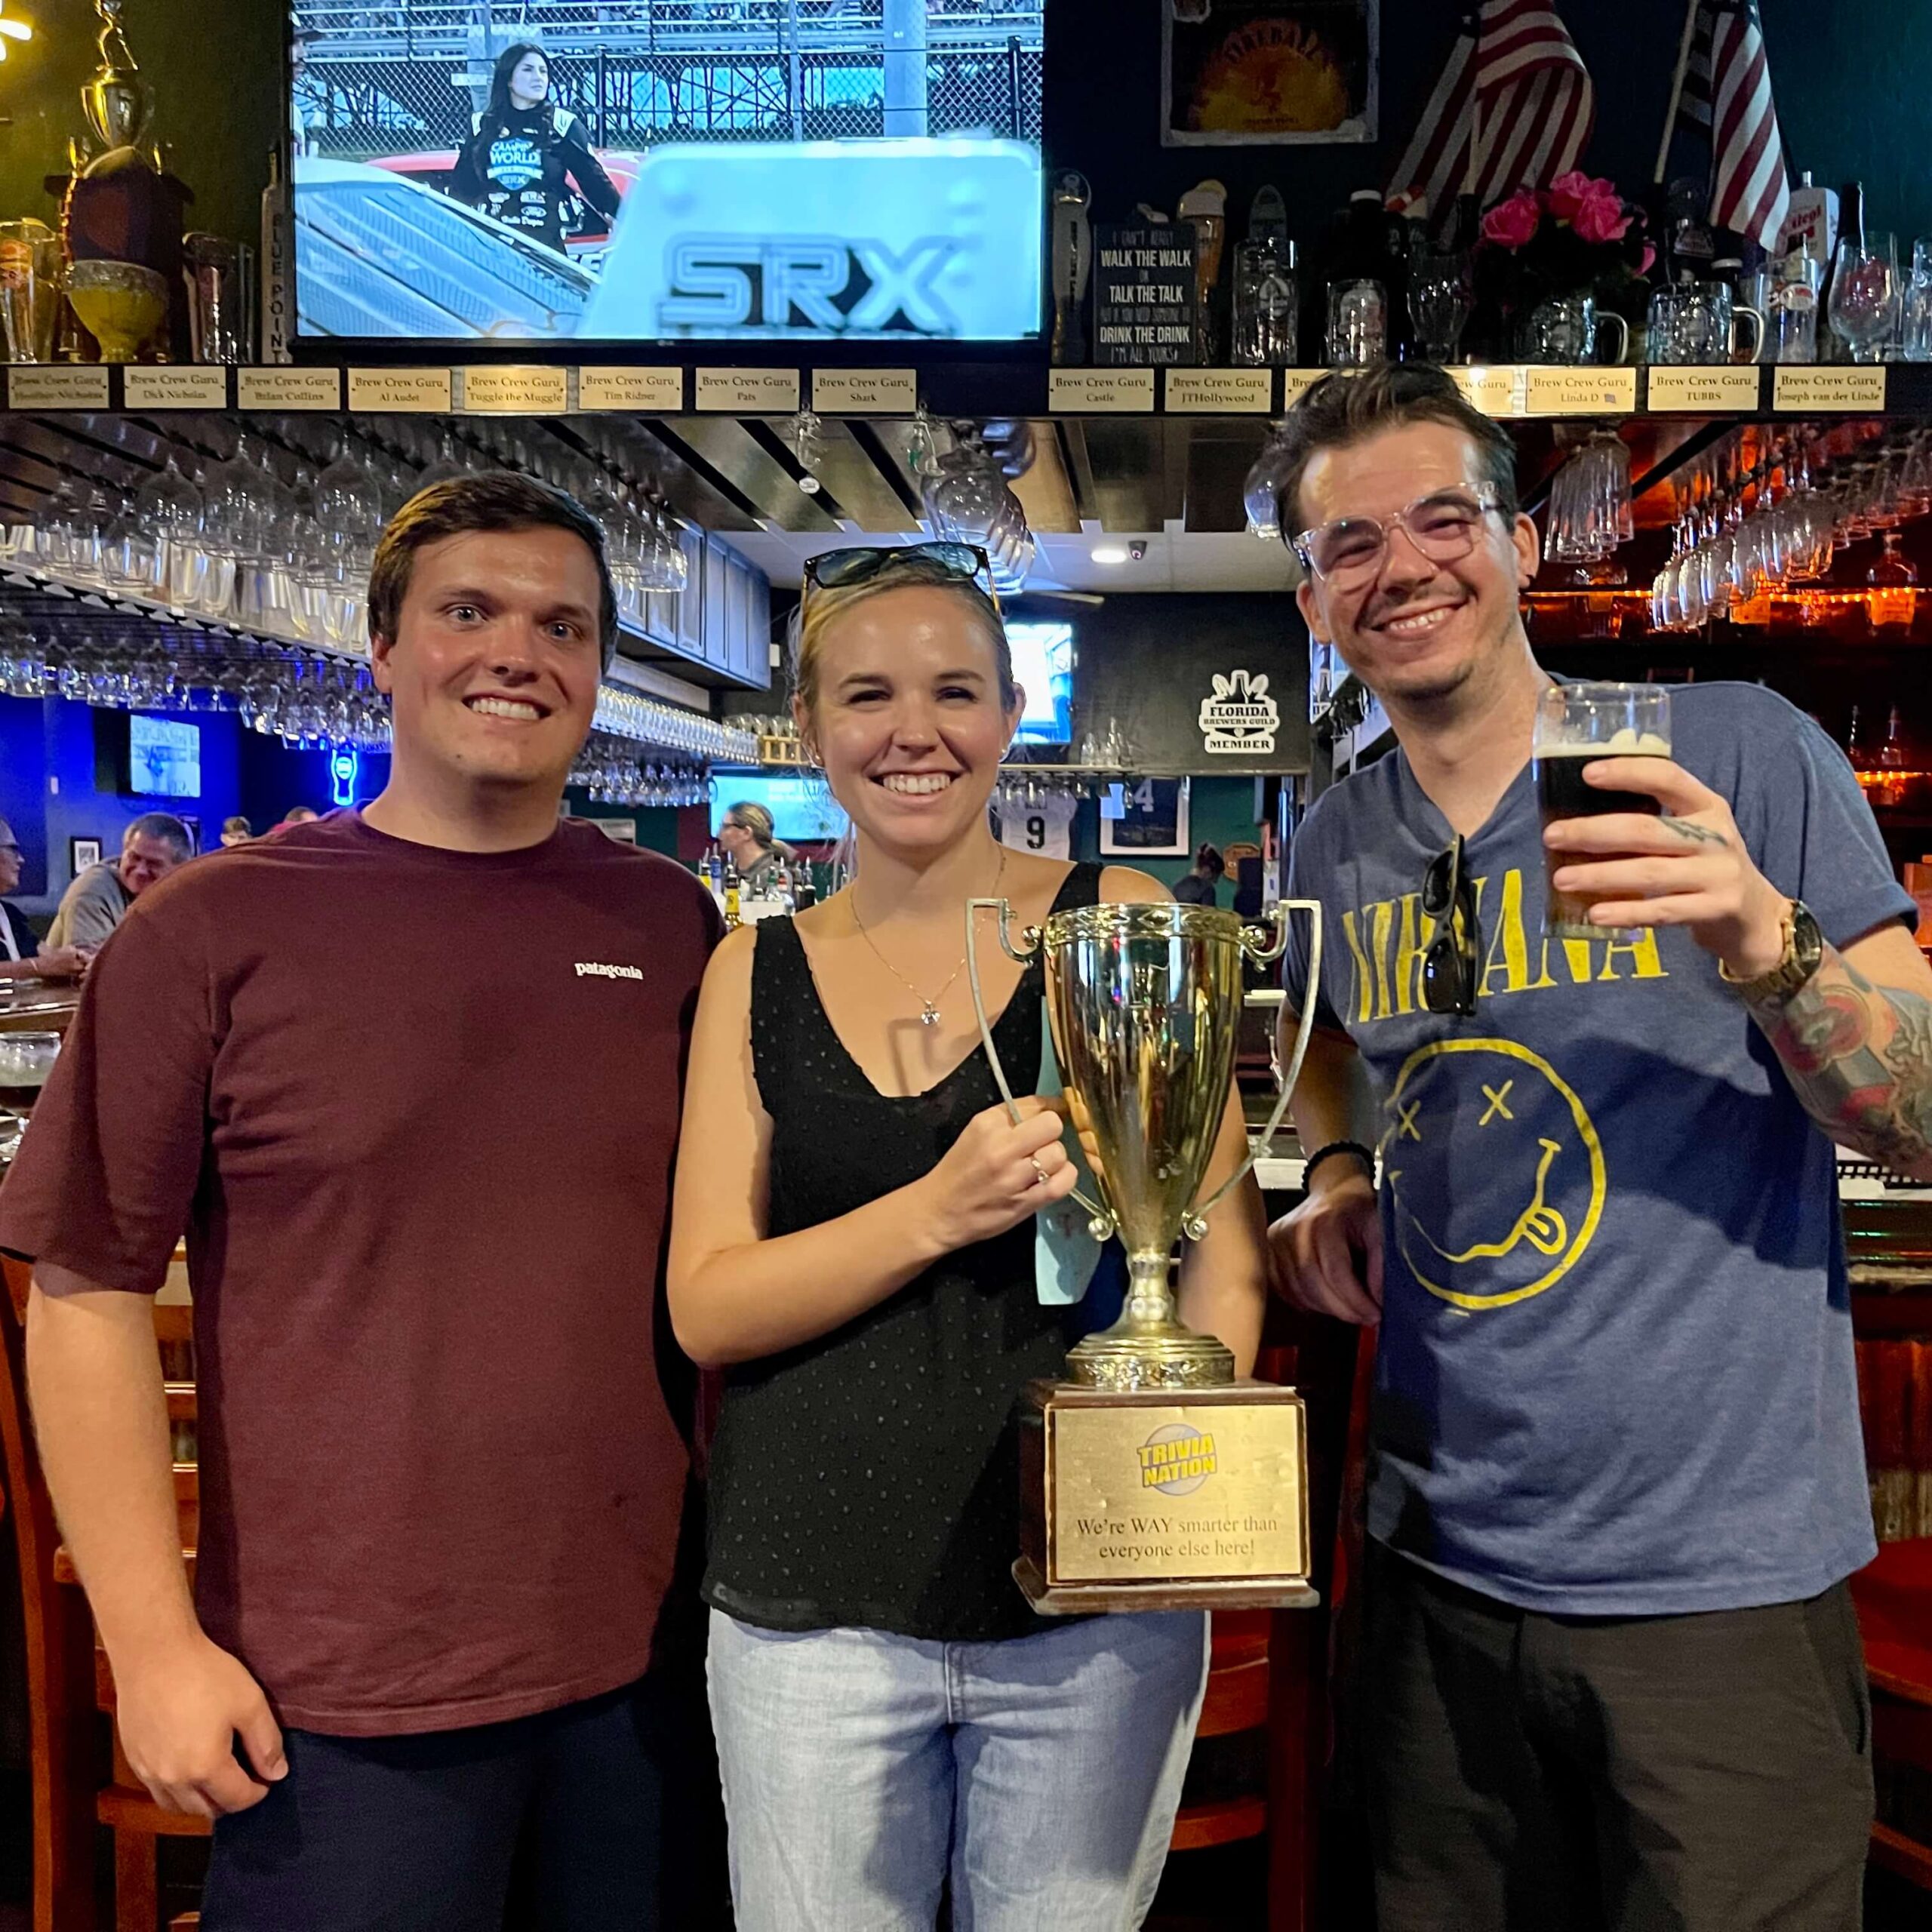 The Broken Barrel Tavern Palm Bay FL 32905 trivia night: two young men and a young woman in between them standing together and smiling while holding up a trophy